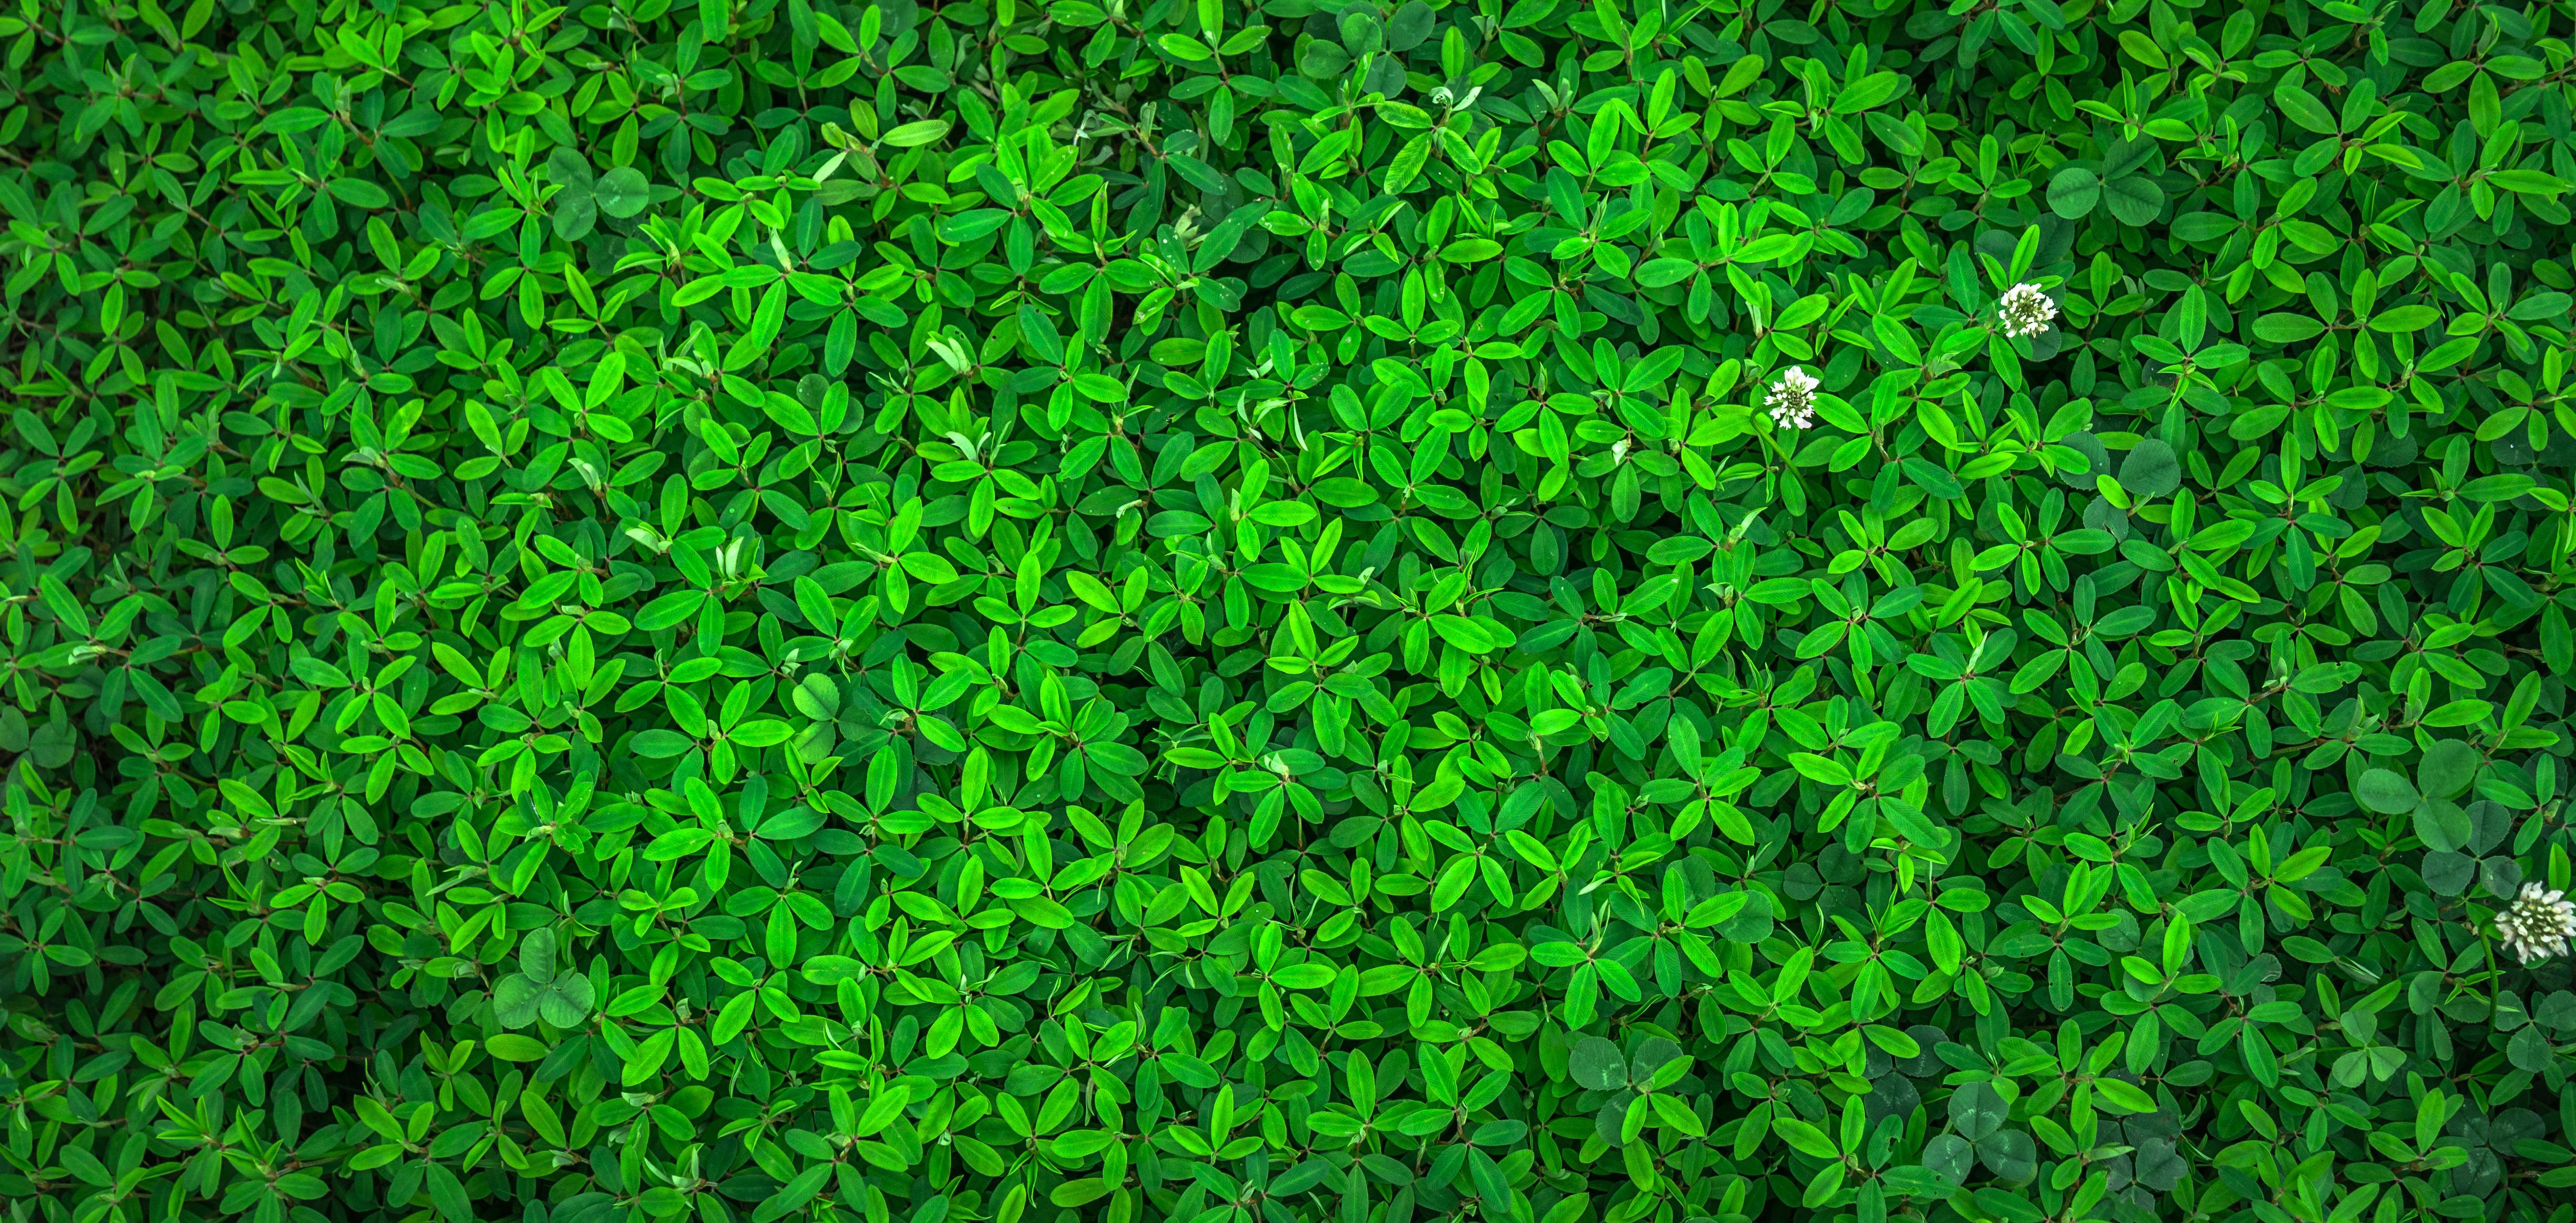 Green 4K wallpapers for your desktop or mobile screen free and easy to